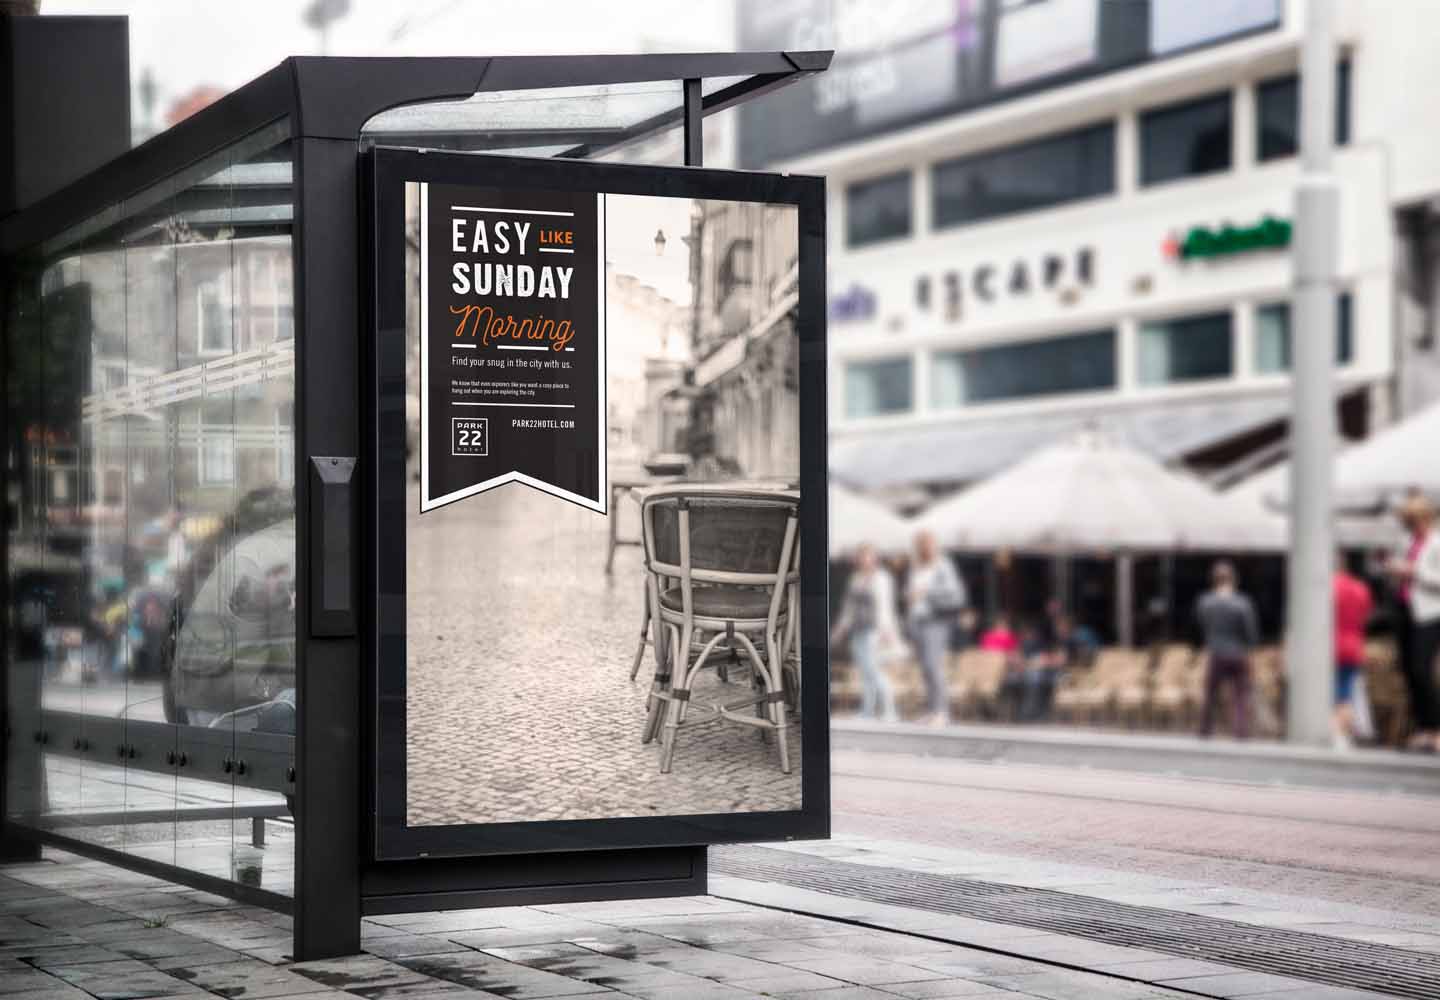 Brand Consultancy in Hospitality Industry. Bus Stop Ad for Park 22